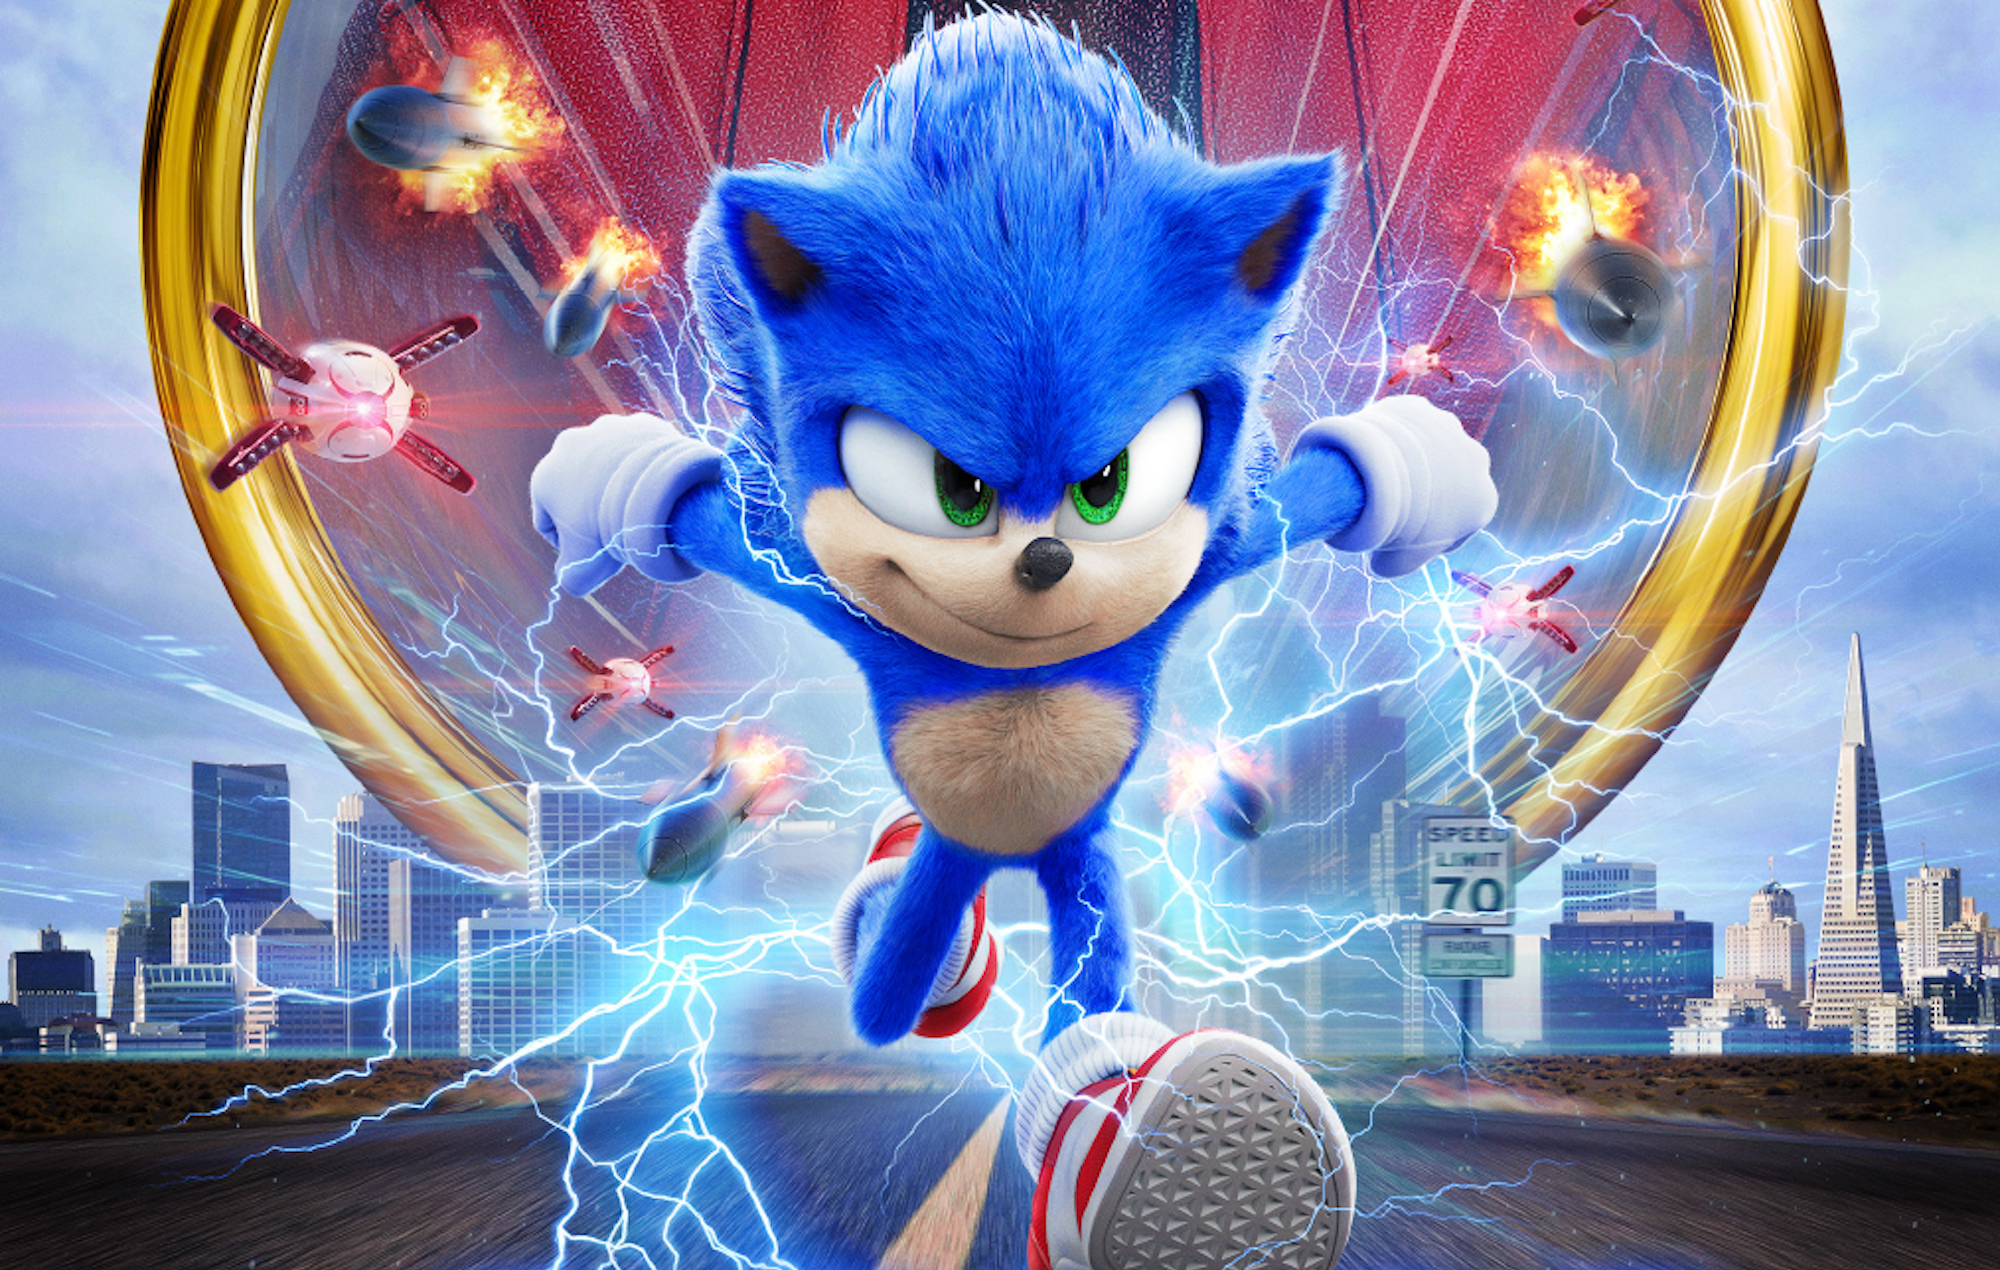 Celebrate The Sonic The Hedgehog Movies Release With Up To 75 Off The